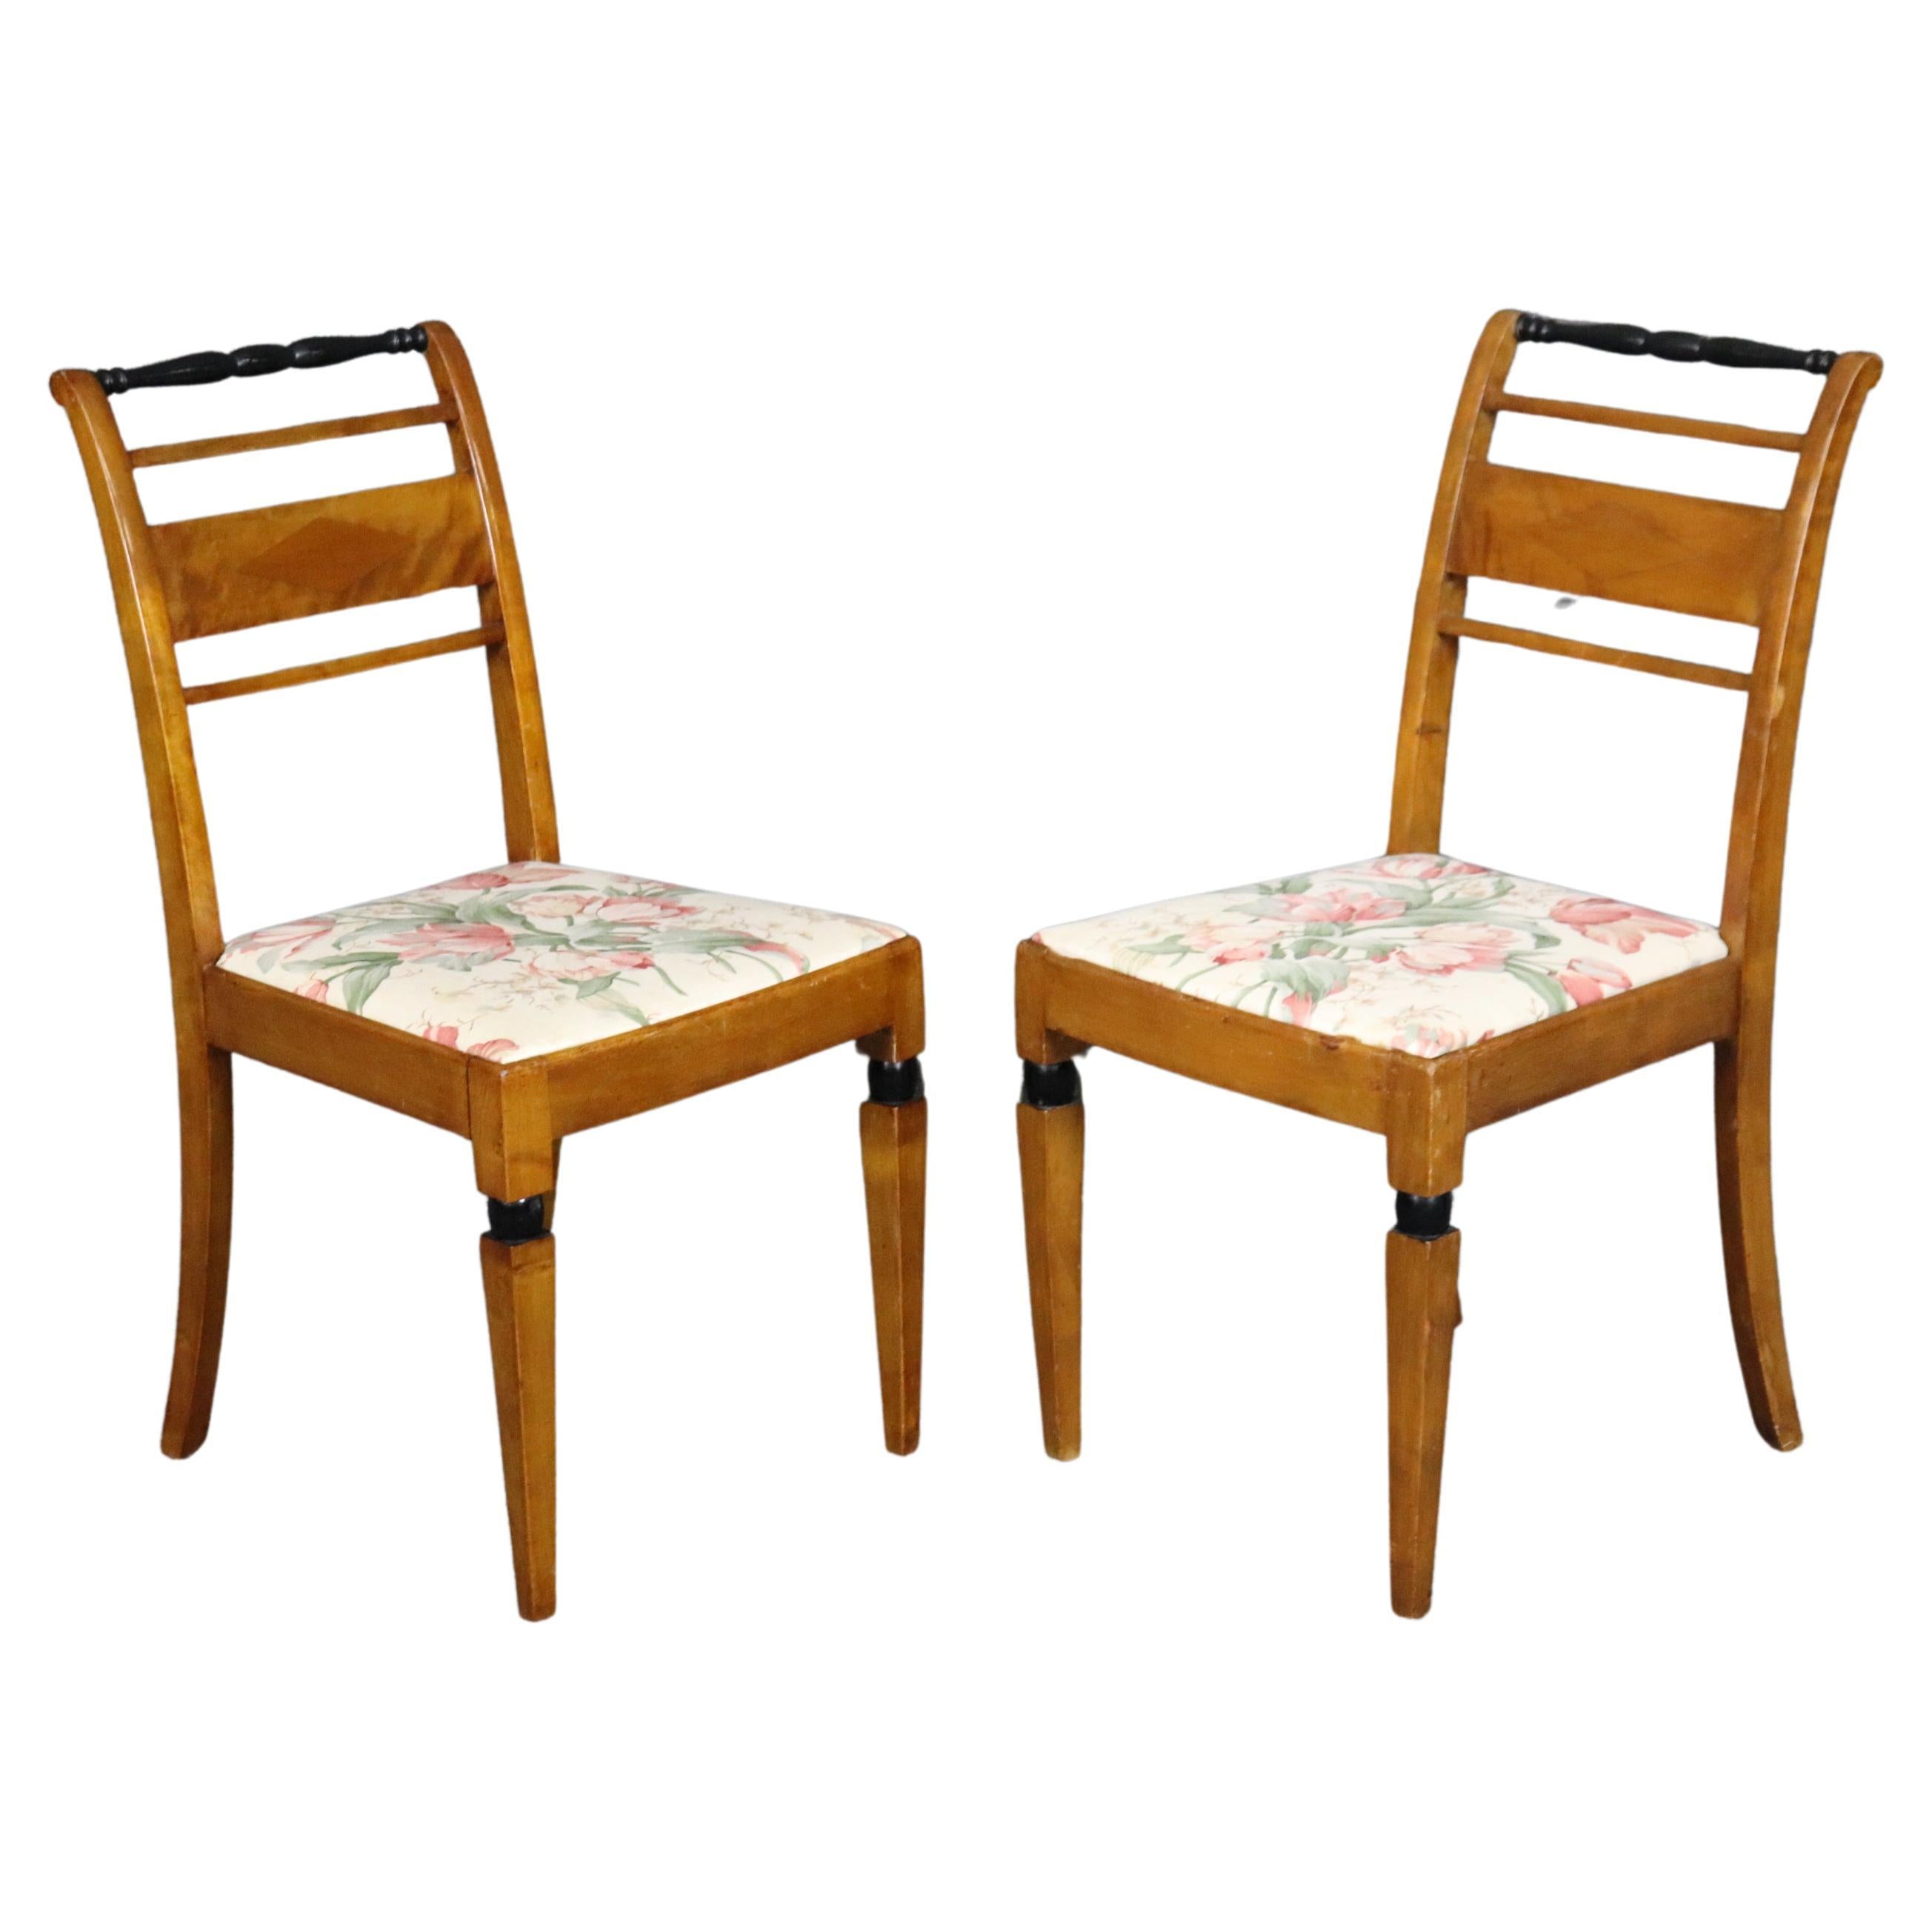 Pair of Birch Antique Biedermeier Style Side chairs with Ebonized Accents For Sale